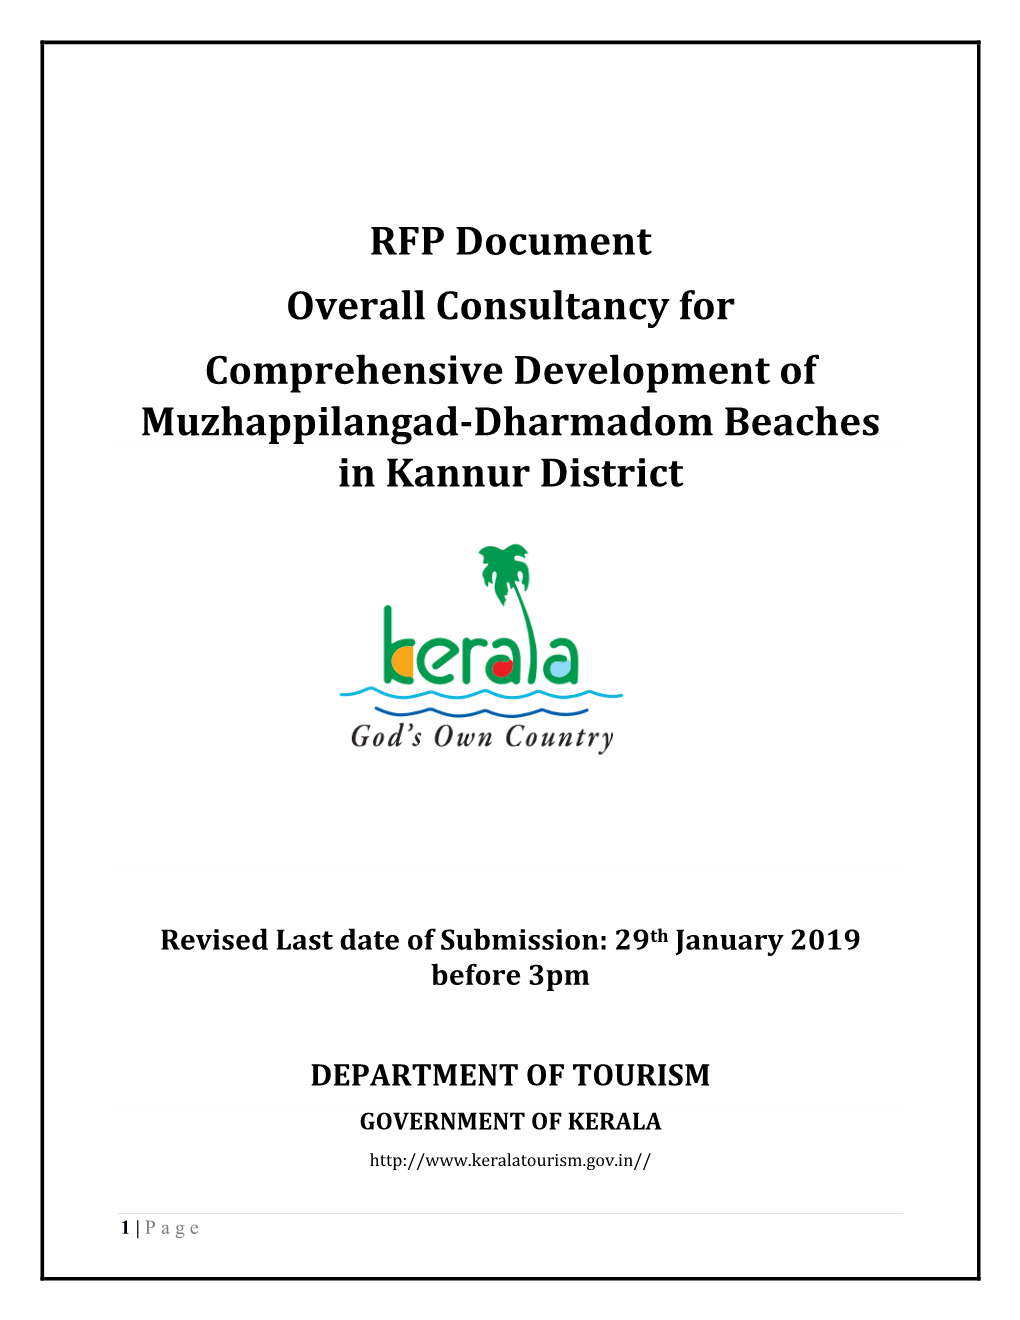 RFP Document Overall Consultancy for Comprehensive Development of Muzhappilangad-Dharmadom Beaches in Kannur District